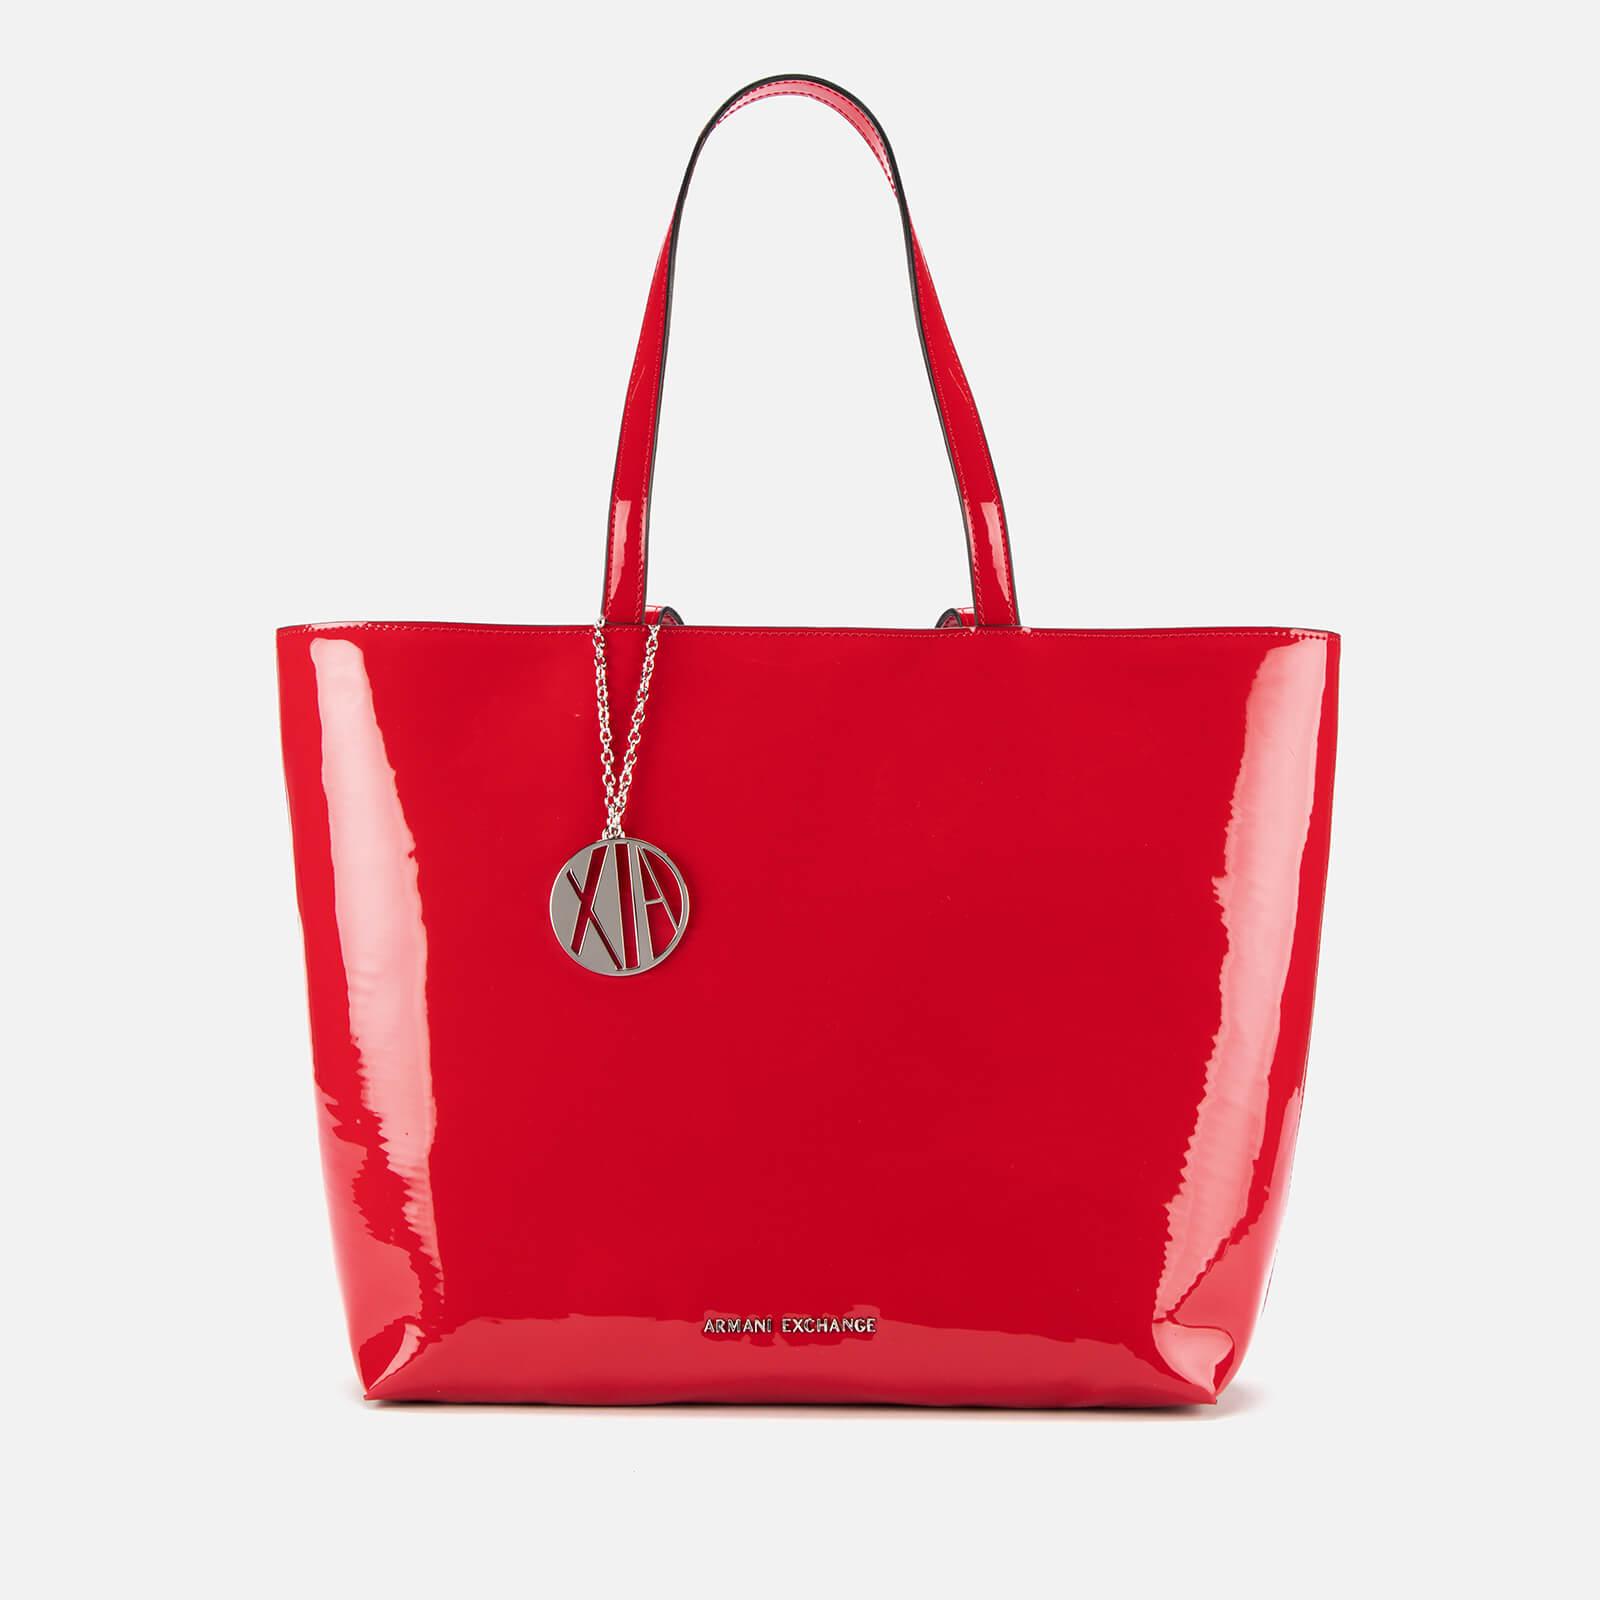 Armani Exchange Patent Shopping Tote Bag in Red | Lyst